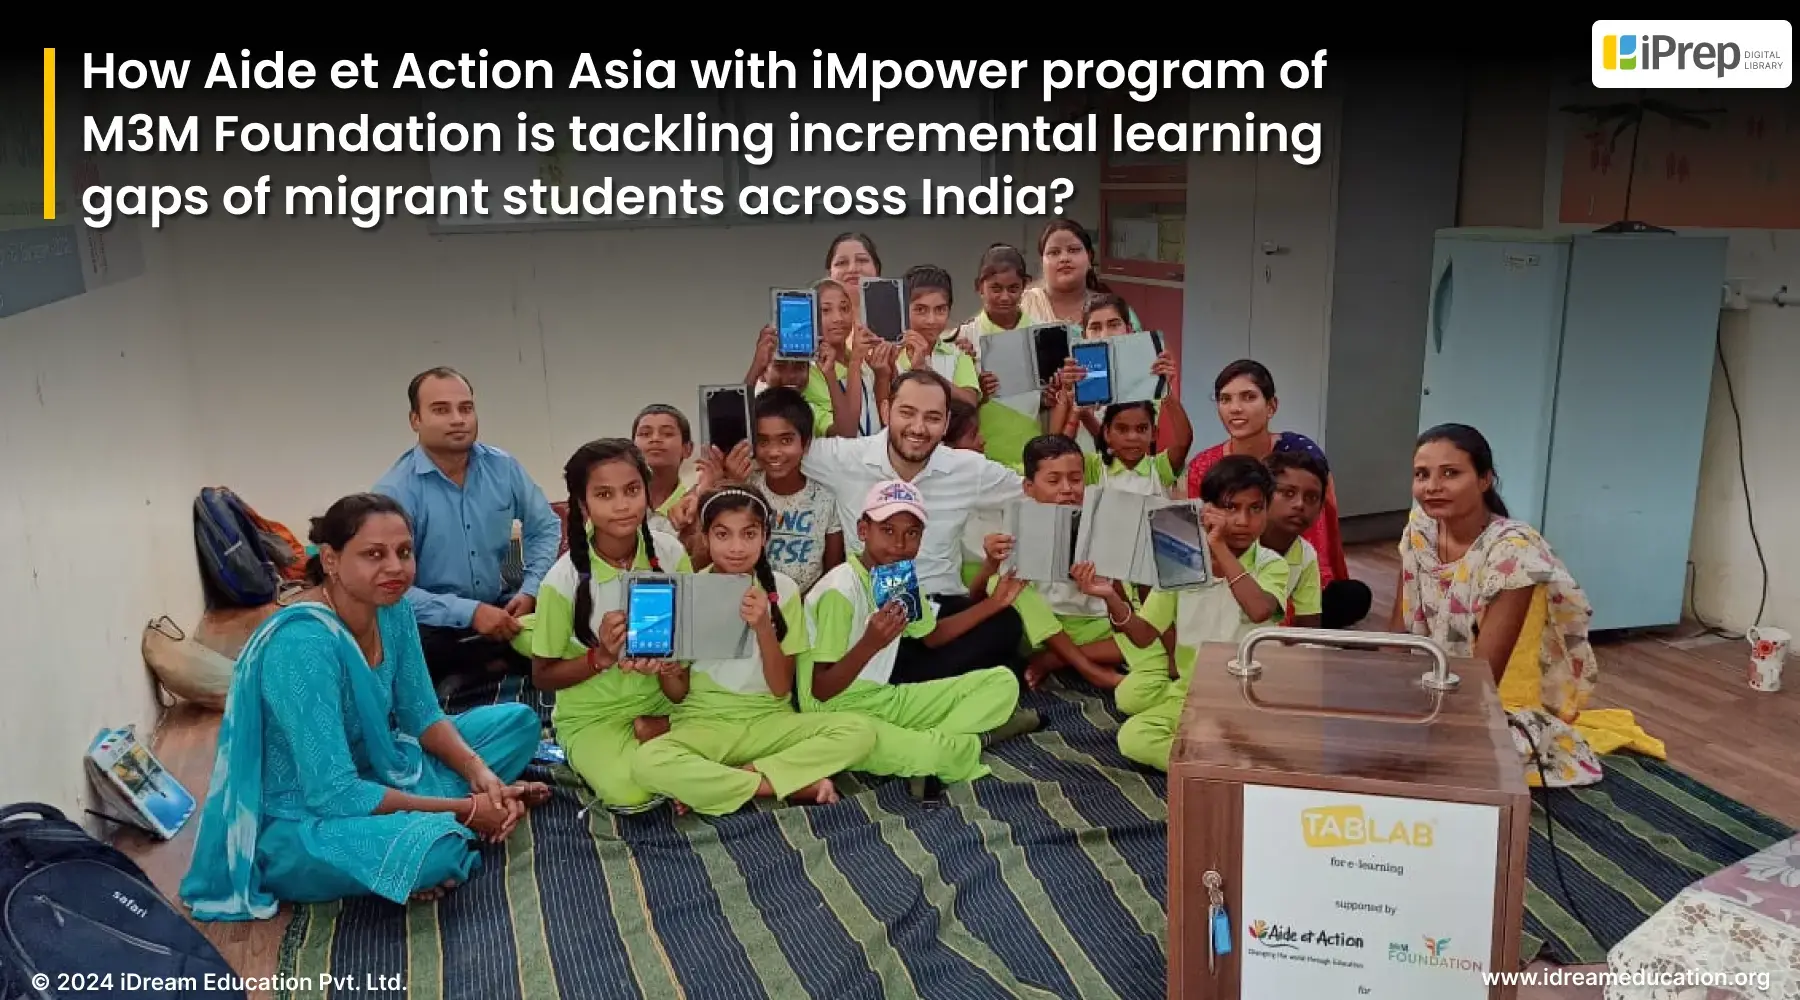 Image showing students with tablets at iMpower Club within the iMpower program of the M3M Foundation. This initiative aims to empower migrant journeys through education and technology.